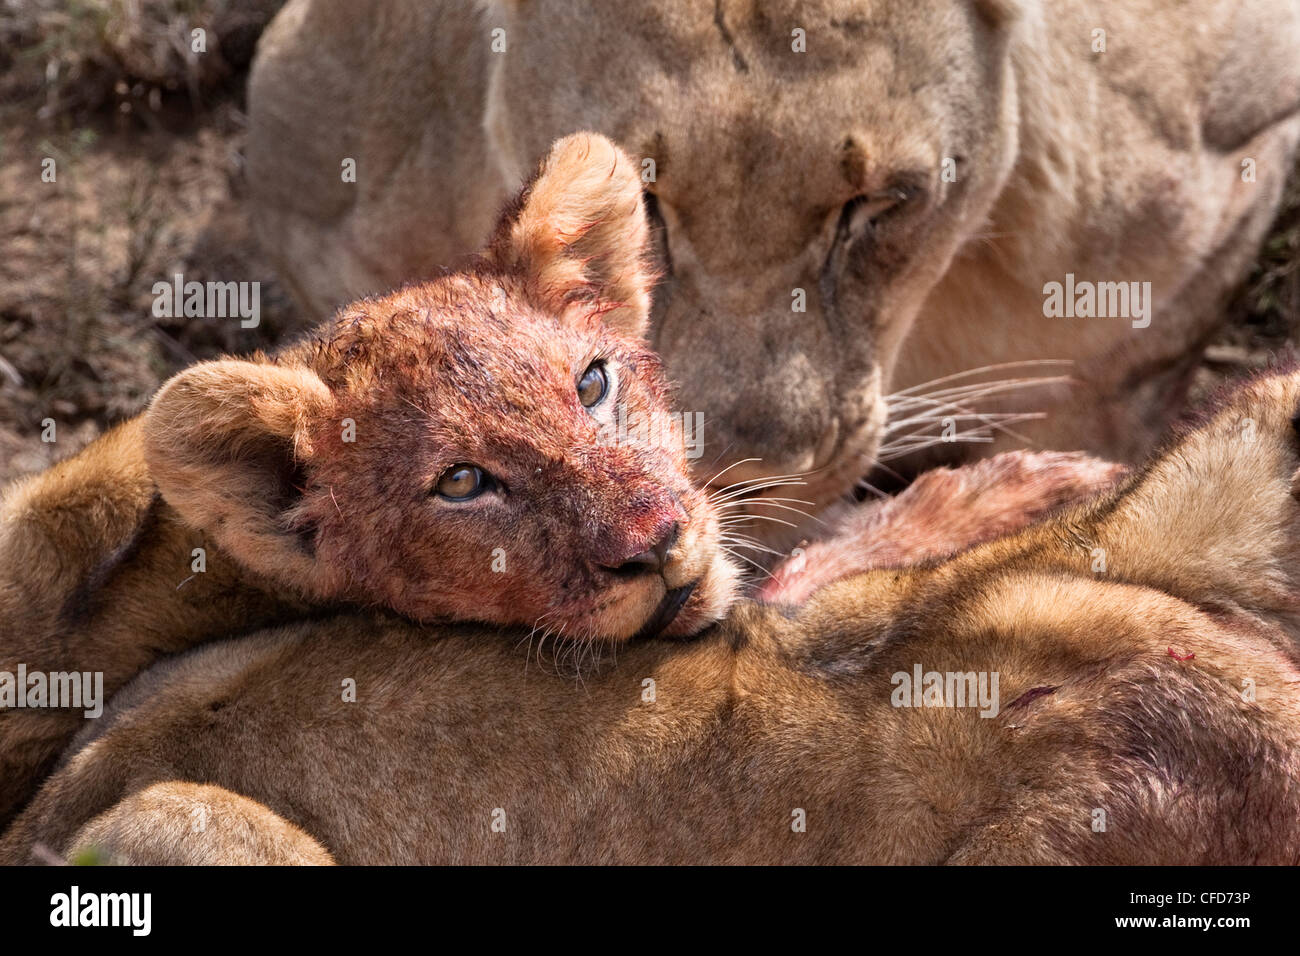 Lion cub (Panthera leo) on kill, Kwandwe private reserve, Eastern Cape, South Africa, Africa Stock Photo